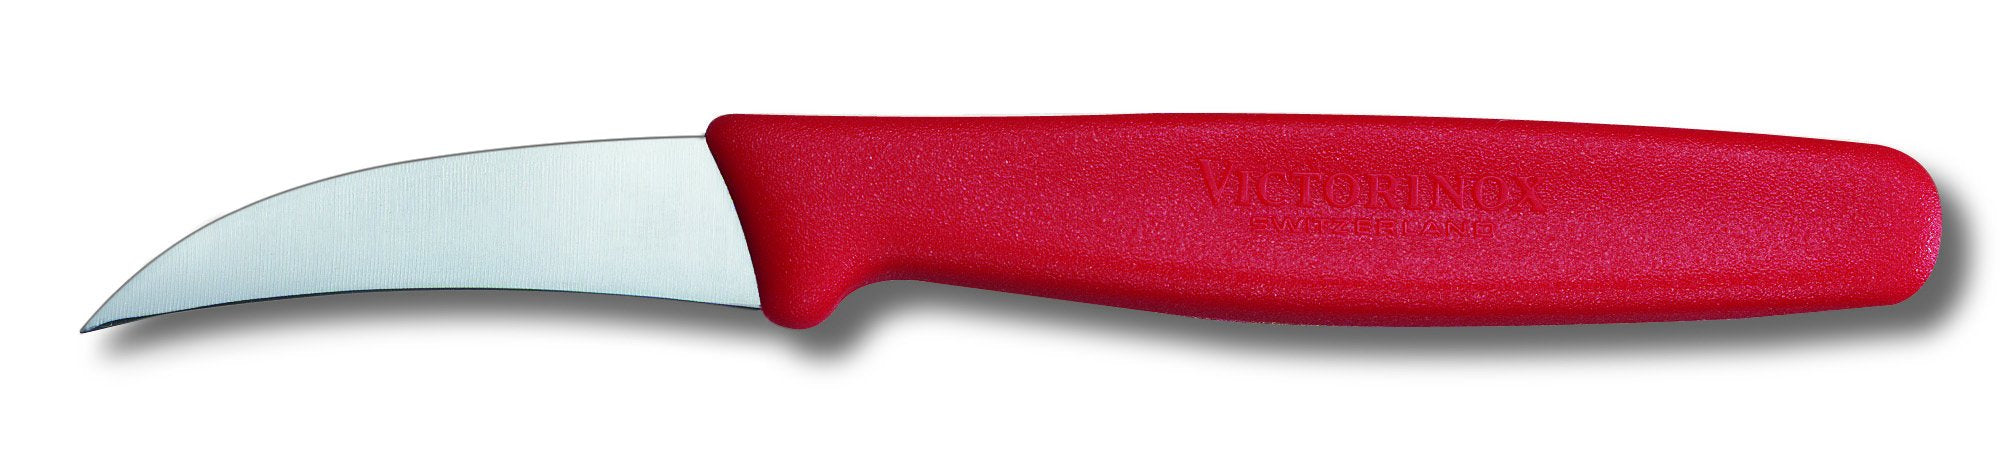 "VICTORINOX PARING KNIFE, CURVEY BLADE, 6 CM, COLOR: RED" - Mabrook Hotel Supplies